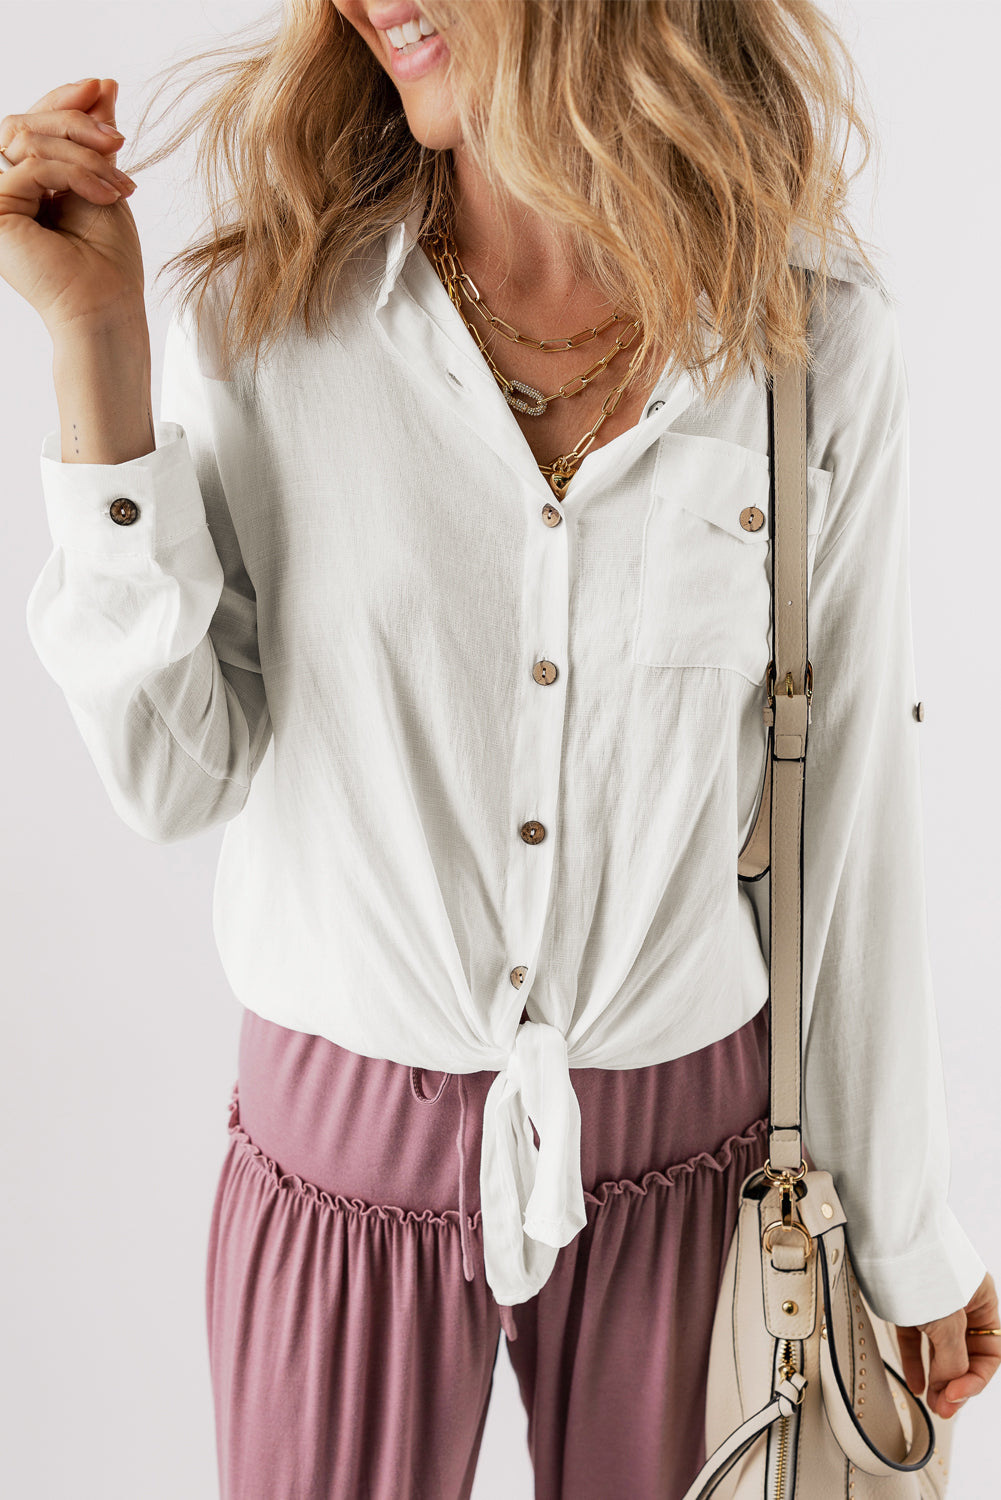 White Roll up Sleeve Knotted Casual Shirt